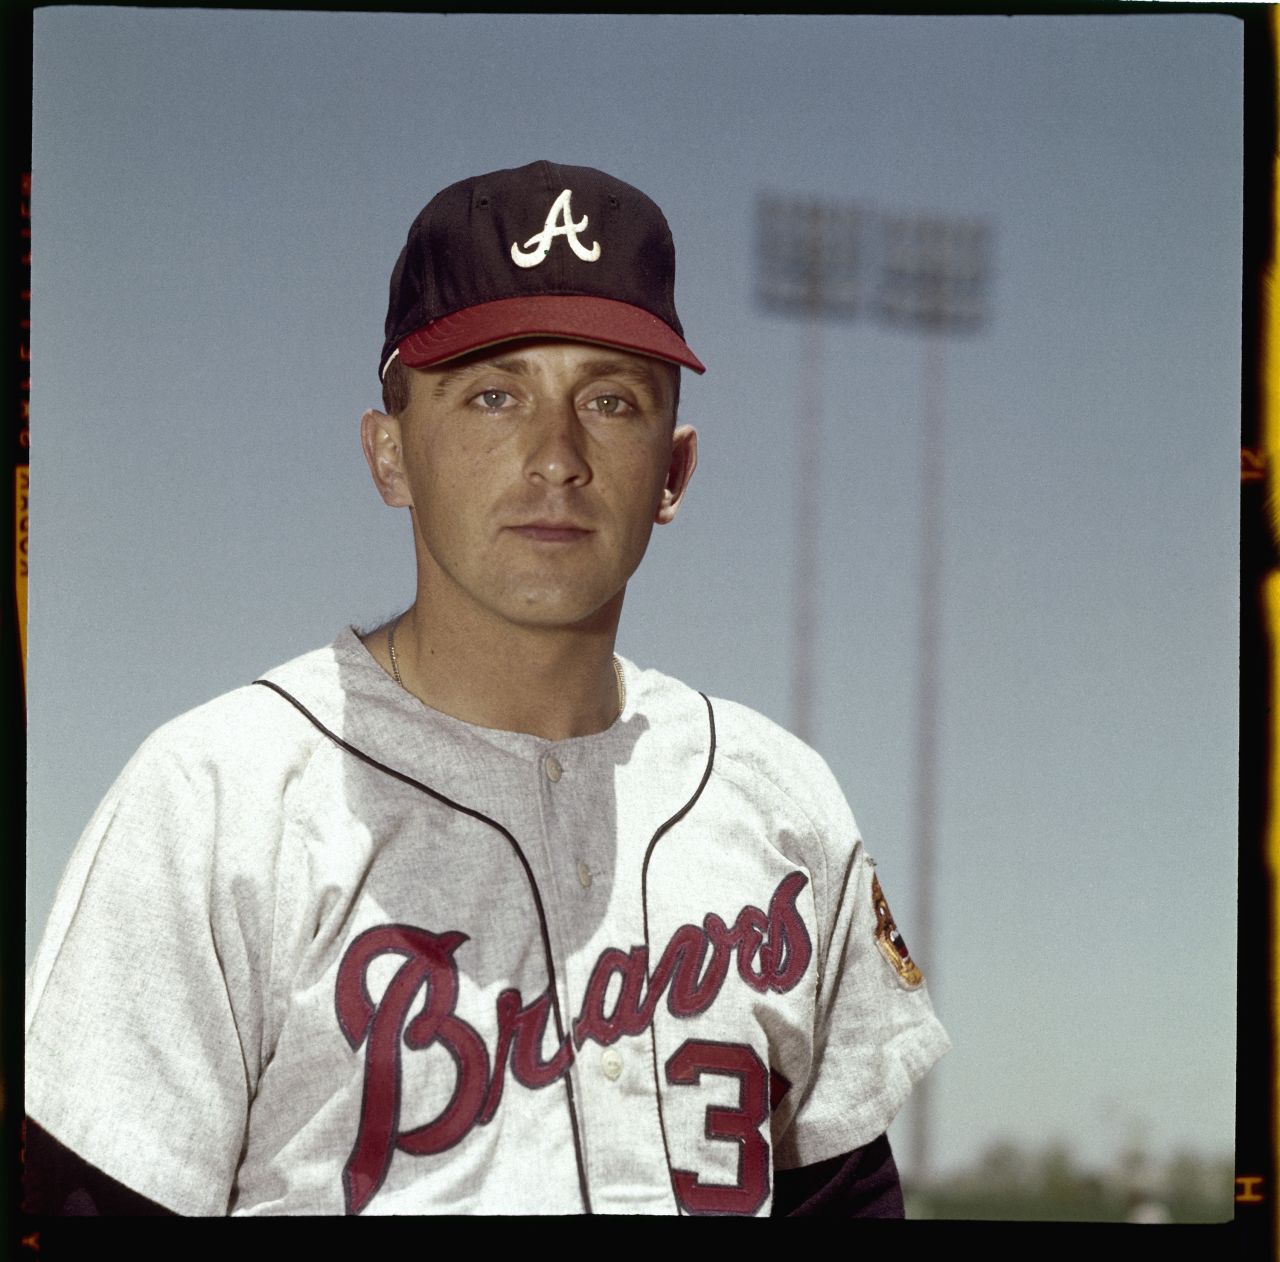 Hall of Fame pitcher <a href="https://www.cnn.com/2020/12/27/us/phil-niekro-obit/index.html" target="_blank">Phil Niekro</a> died December 26 after a battle with cancer, the Atlanta Braves announced. He was 81. Niekro mastered the art of throwing the knuckleball, a rarity among major league pitchers.